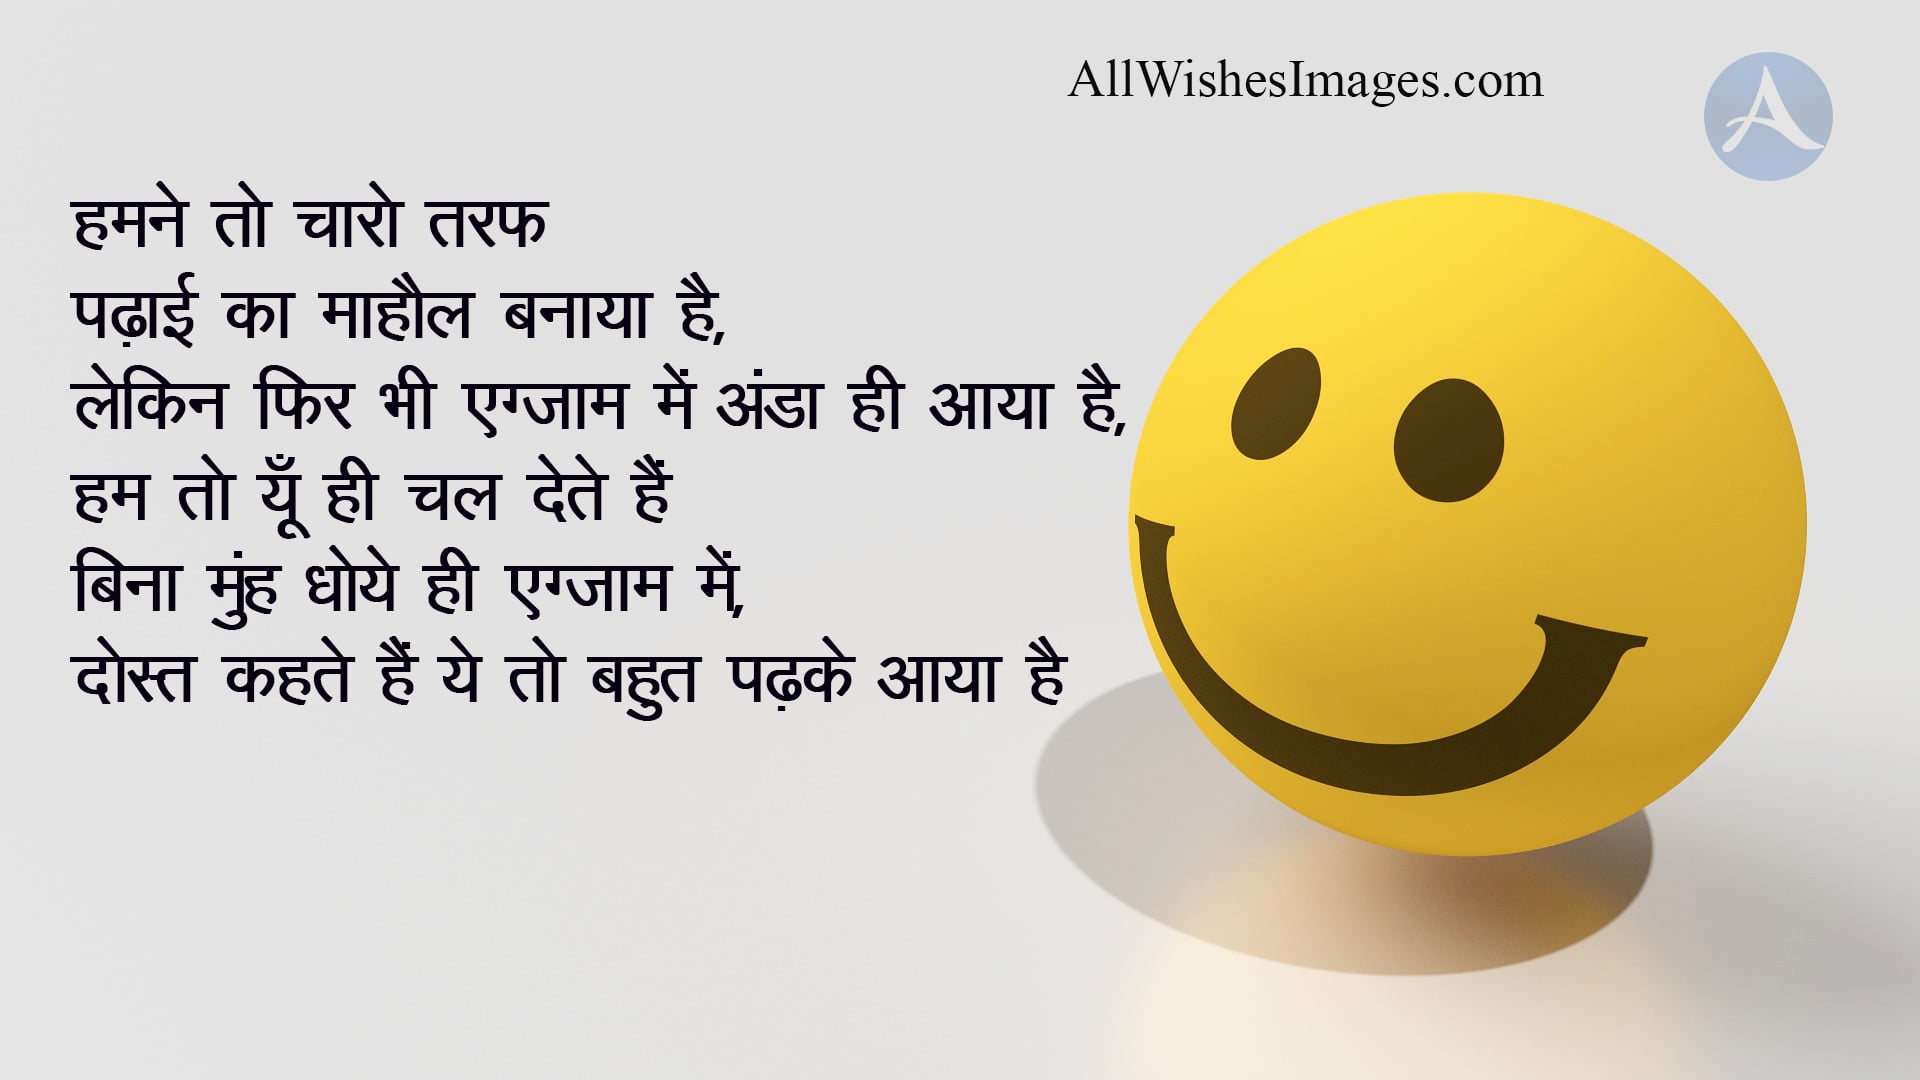 Funny Dosti Shayari Image In Hindi - All Wishes Images - Images For Whatsapp